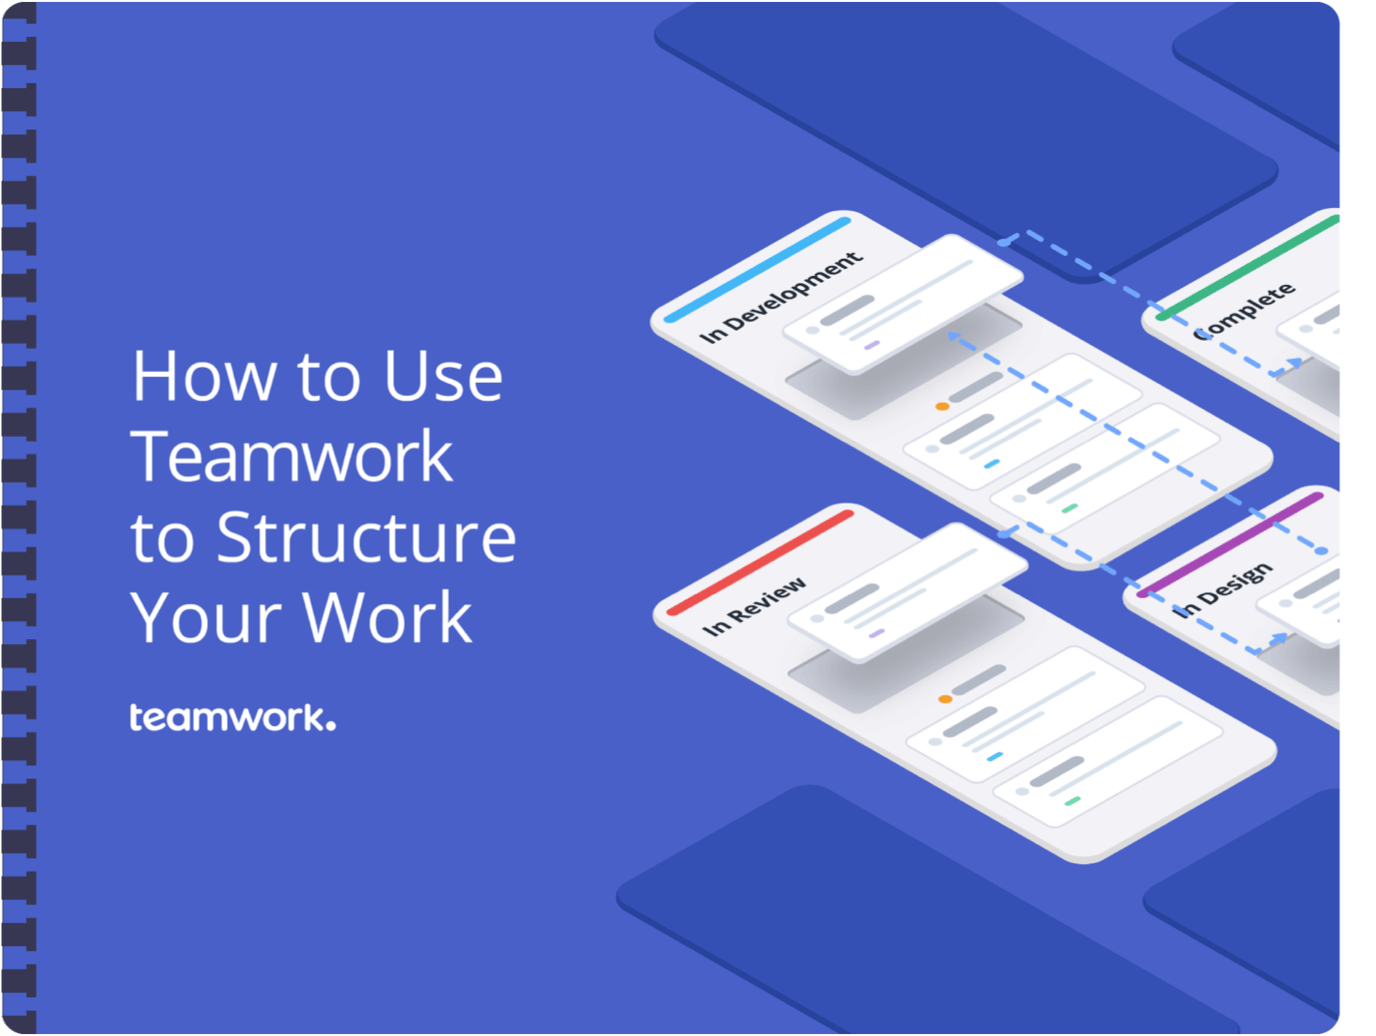 How to structure your work using Teamwork